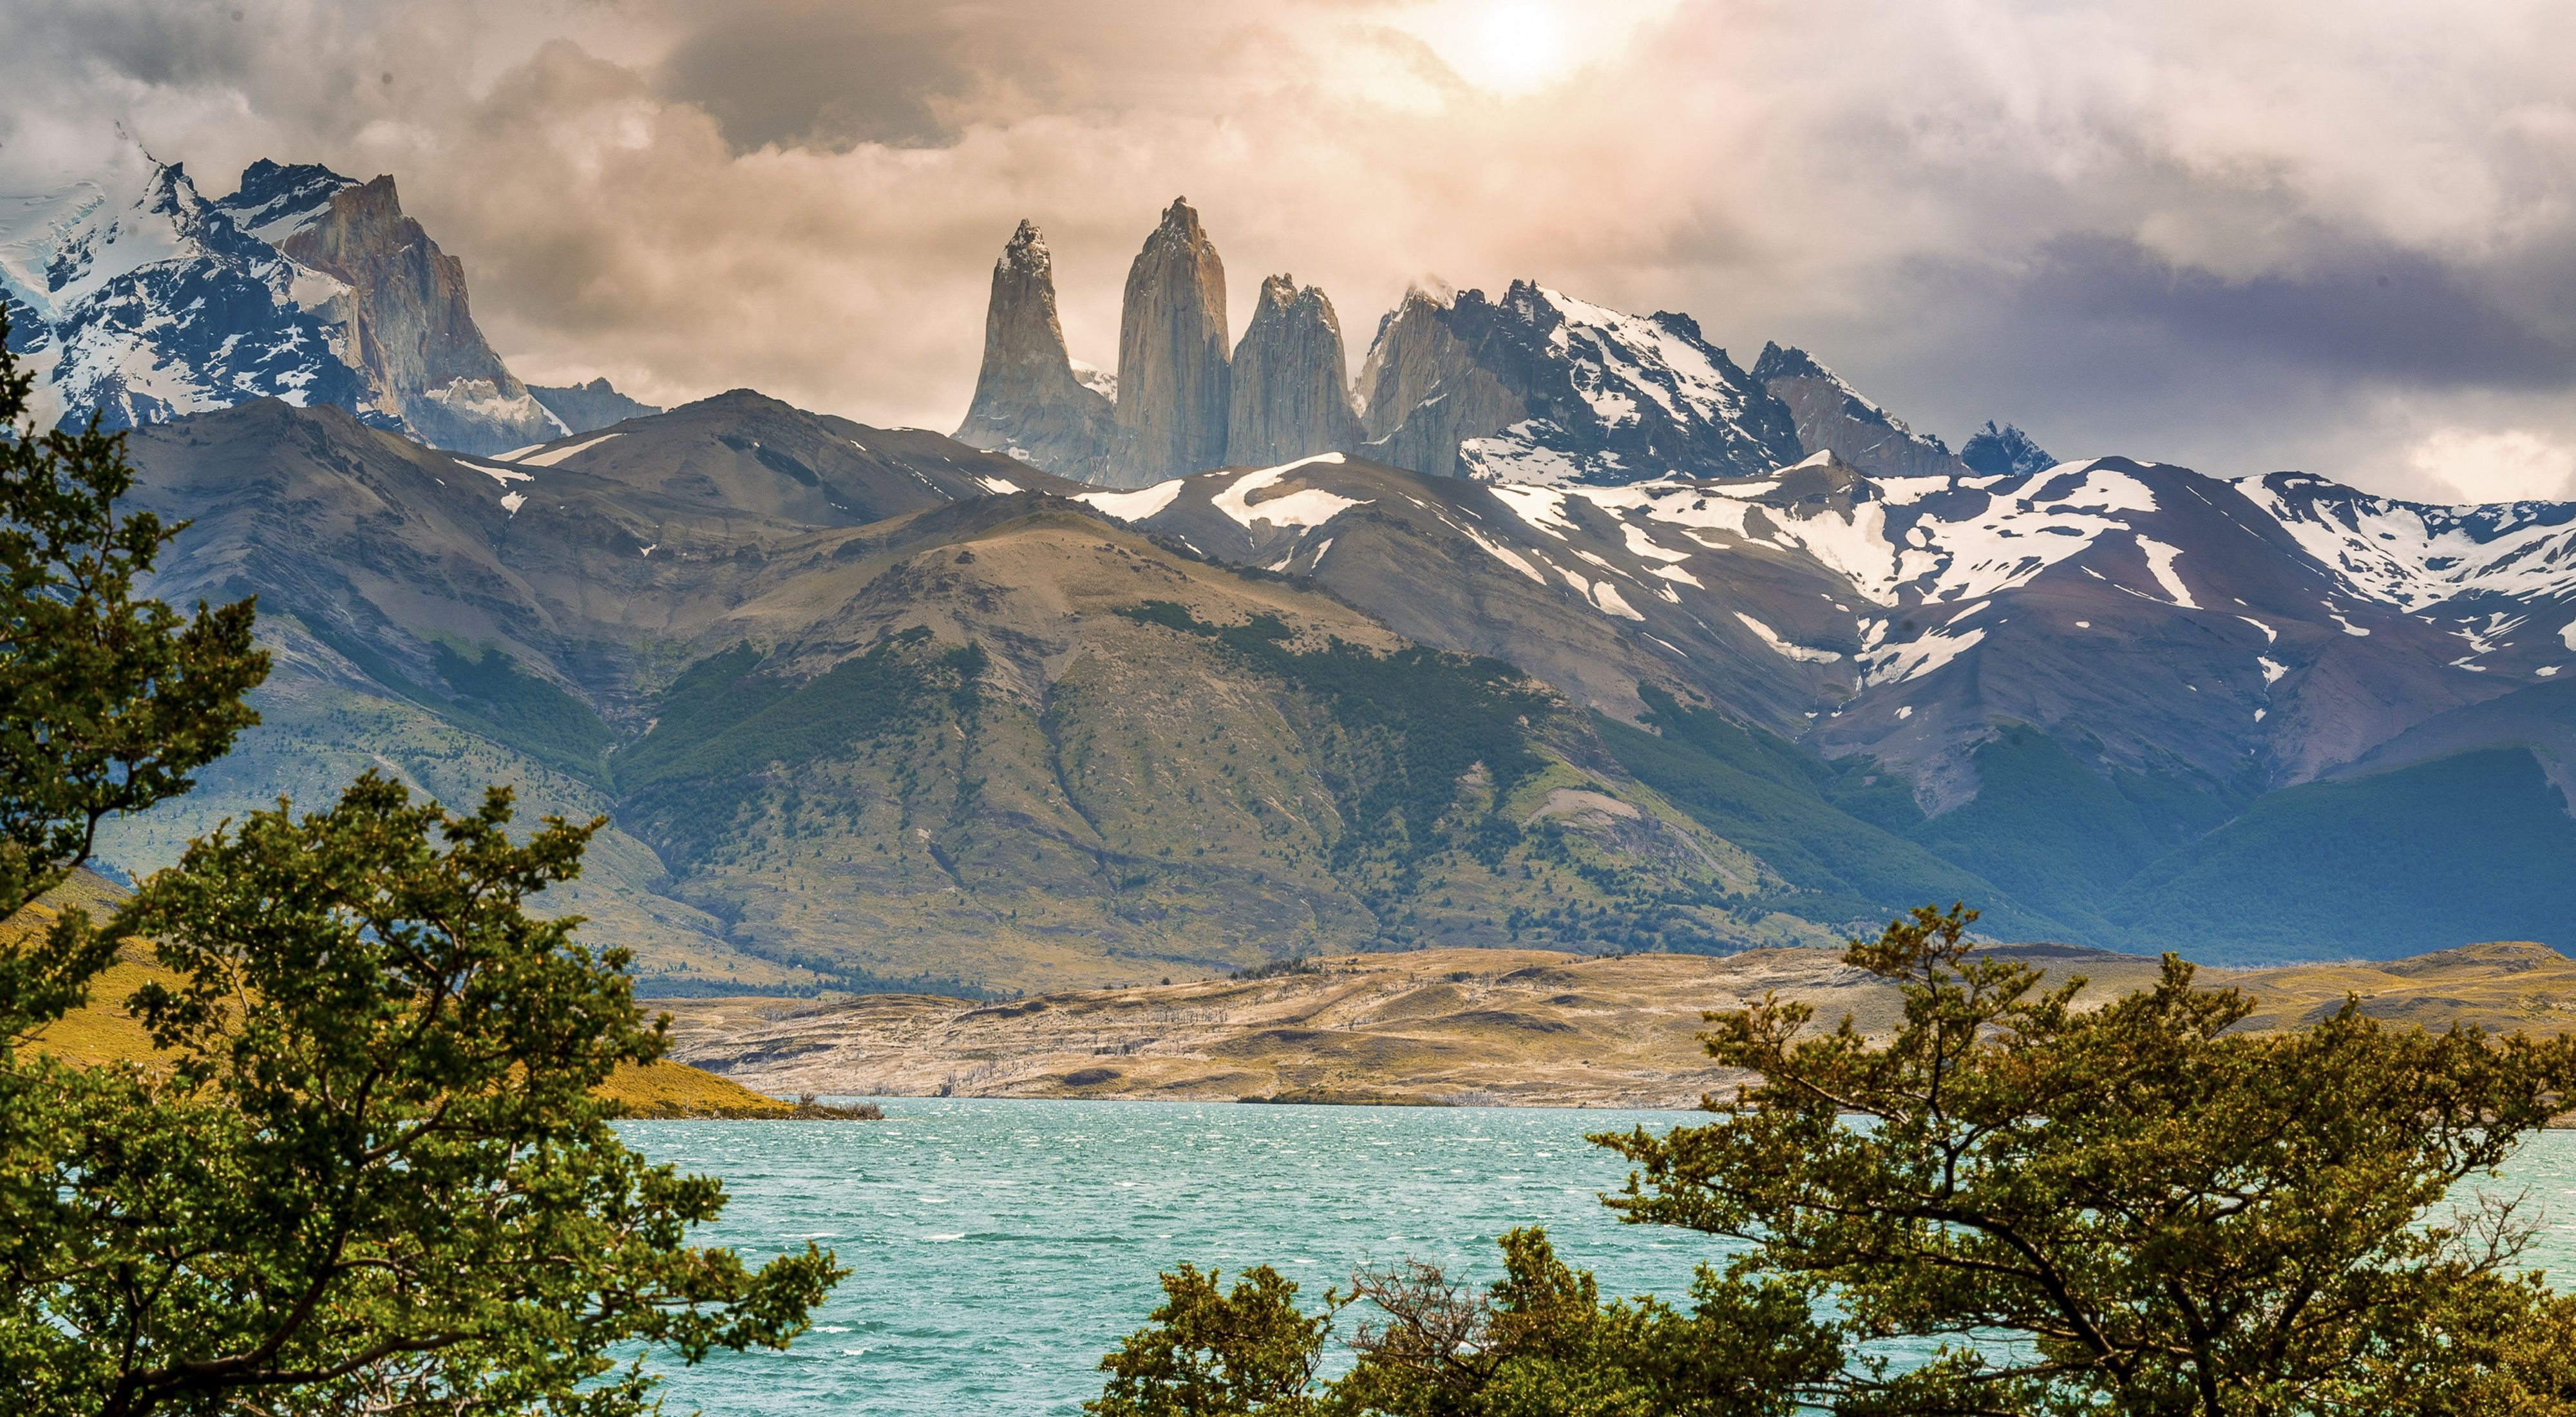 Parque Nacional Torres del Paine in Chile, showing sparkling waters of a bay and steep, snow-covered mountains in the distance.